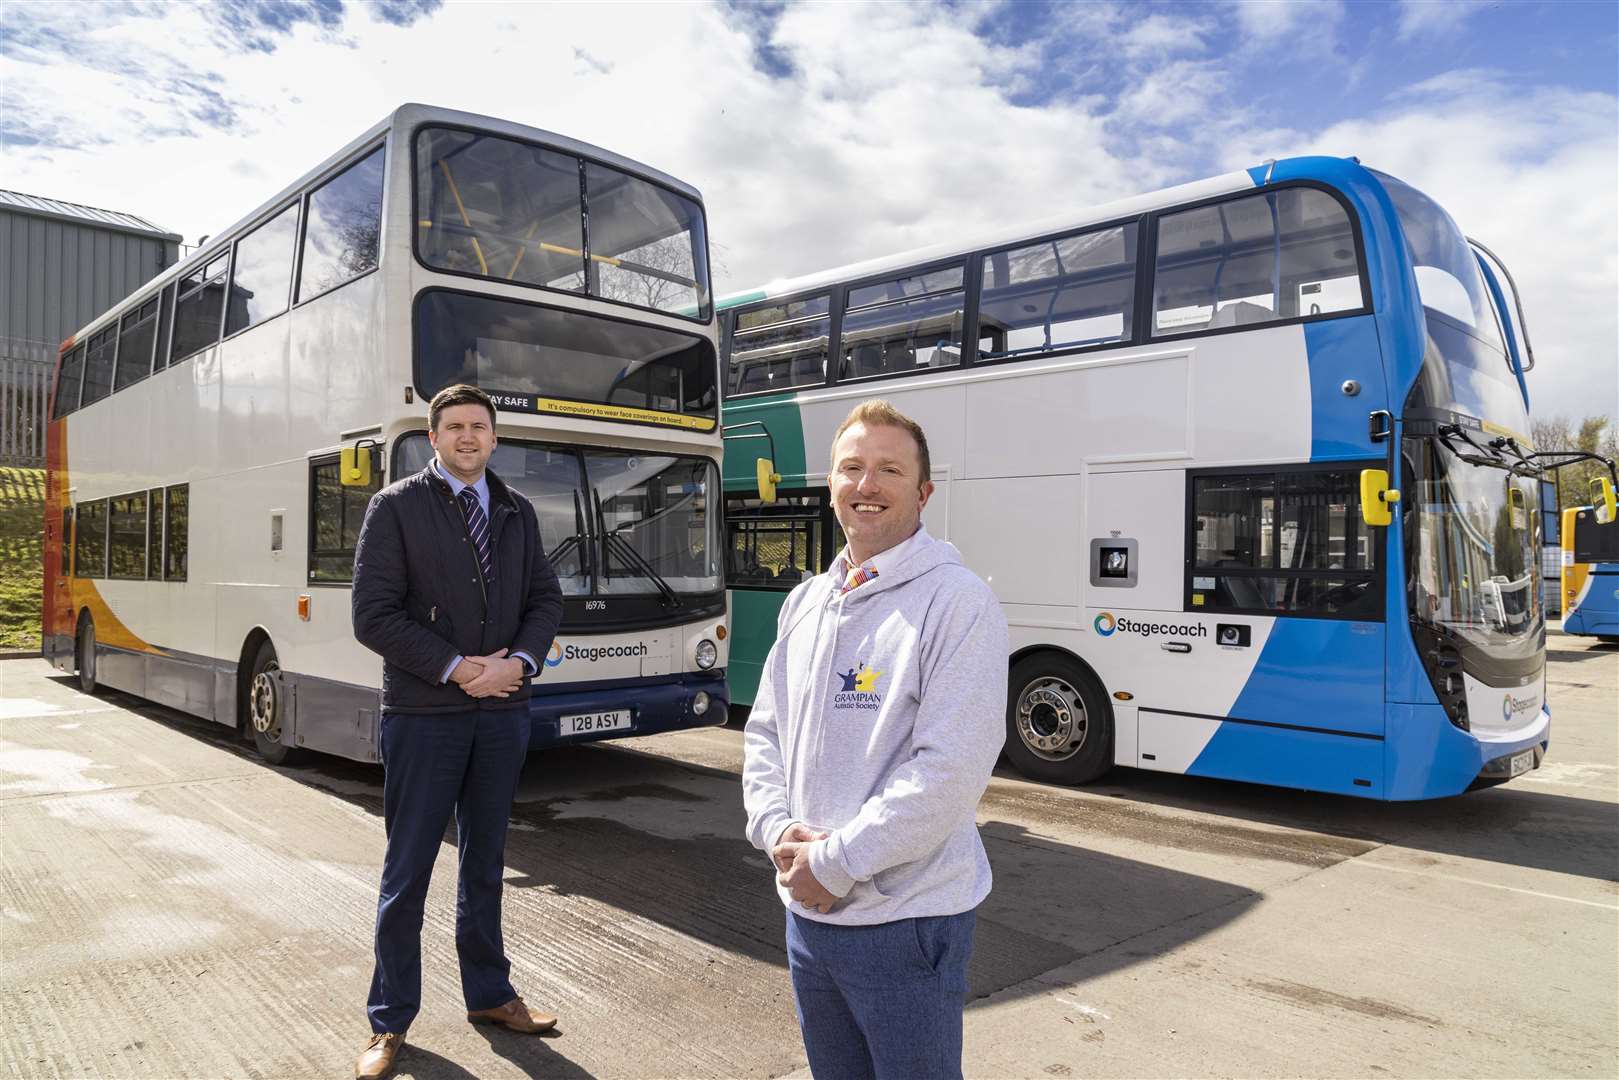 Partnership launches Sensory Bus project for the north-east